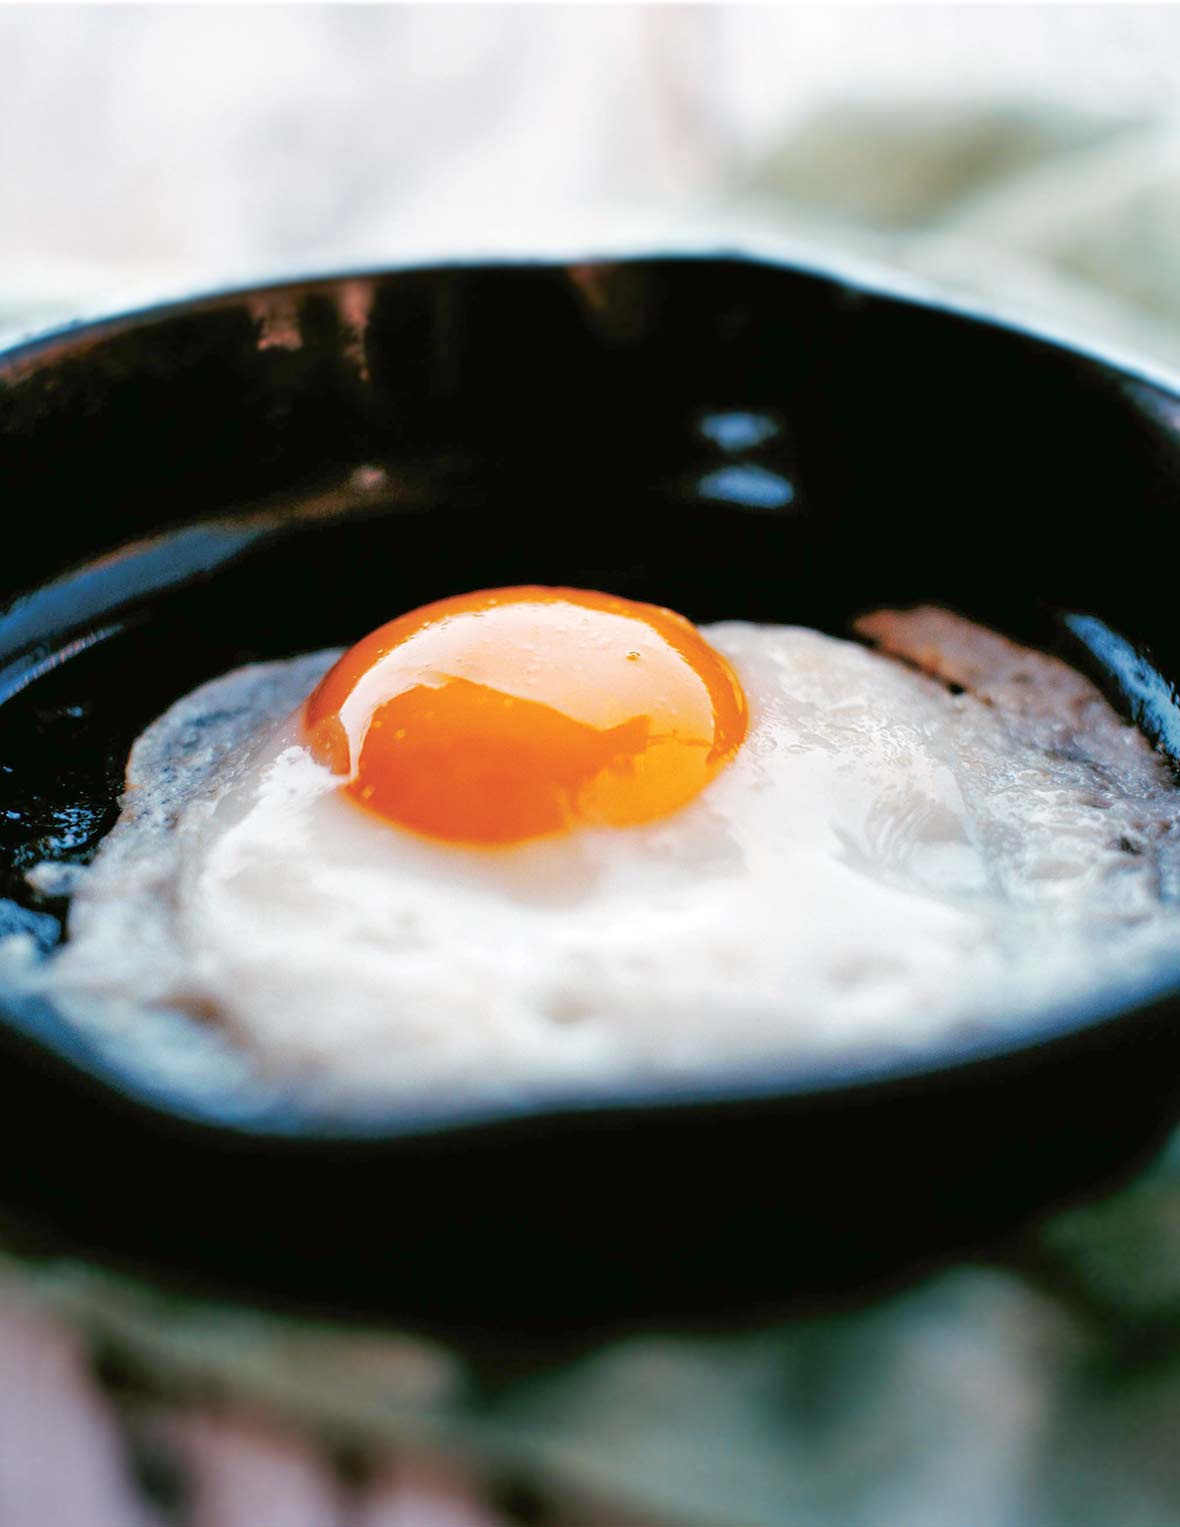 A perfect fried egg in a small black skillet.